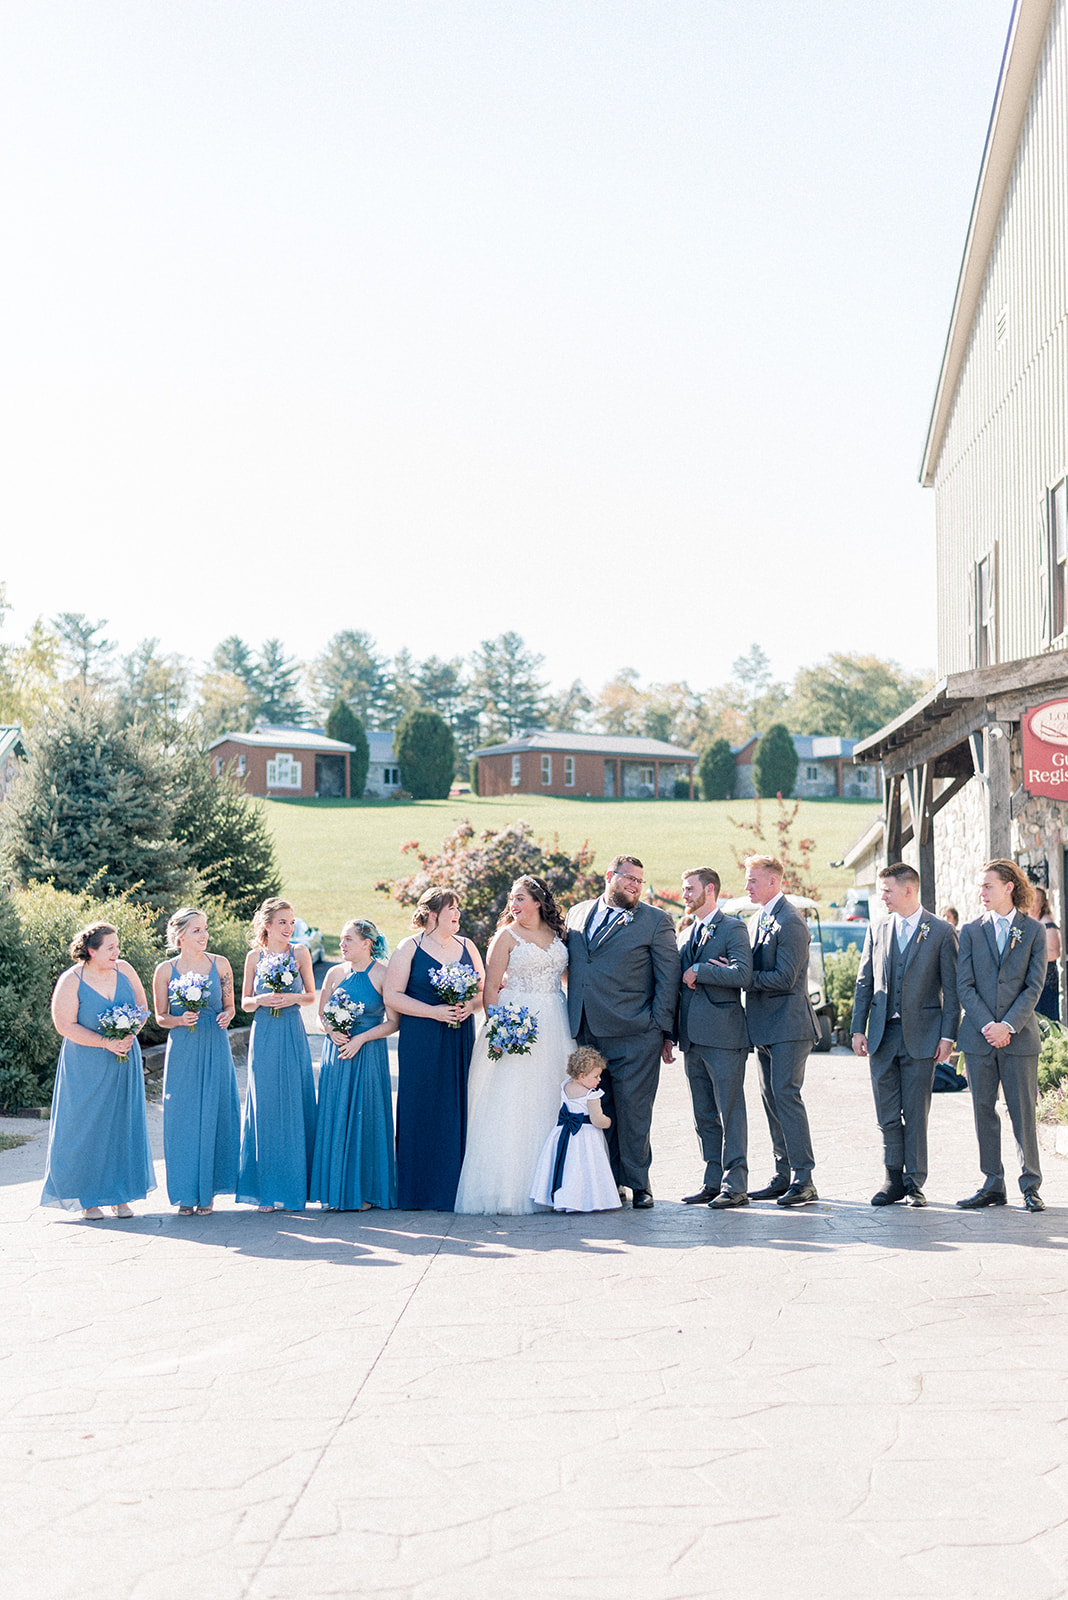 Pennsylvania wedding photographer captures bride and groom with wedding party